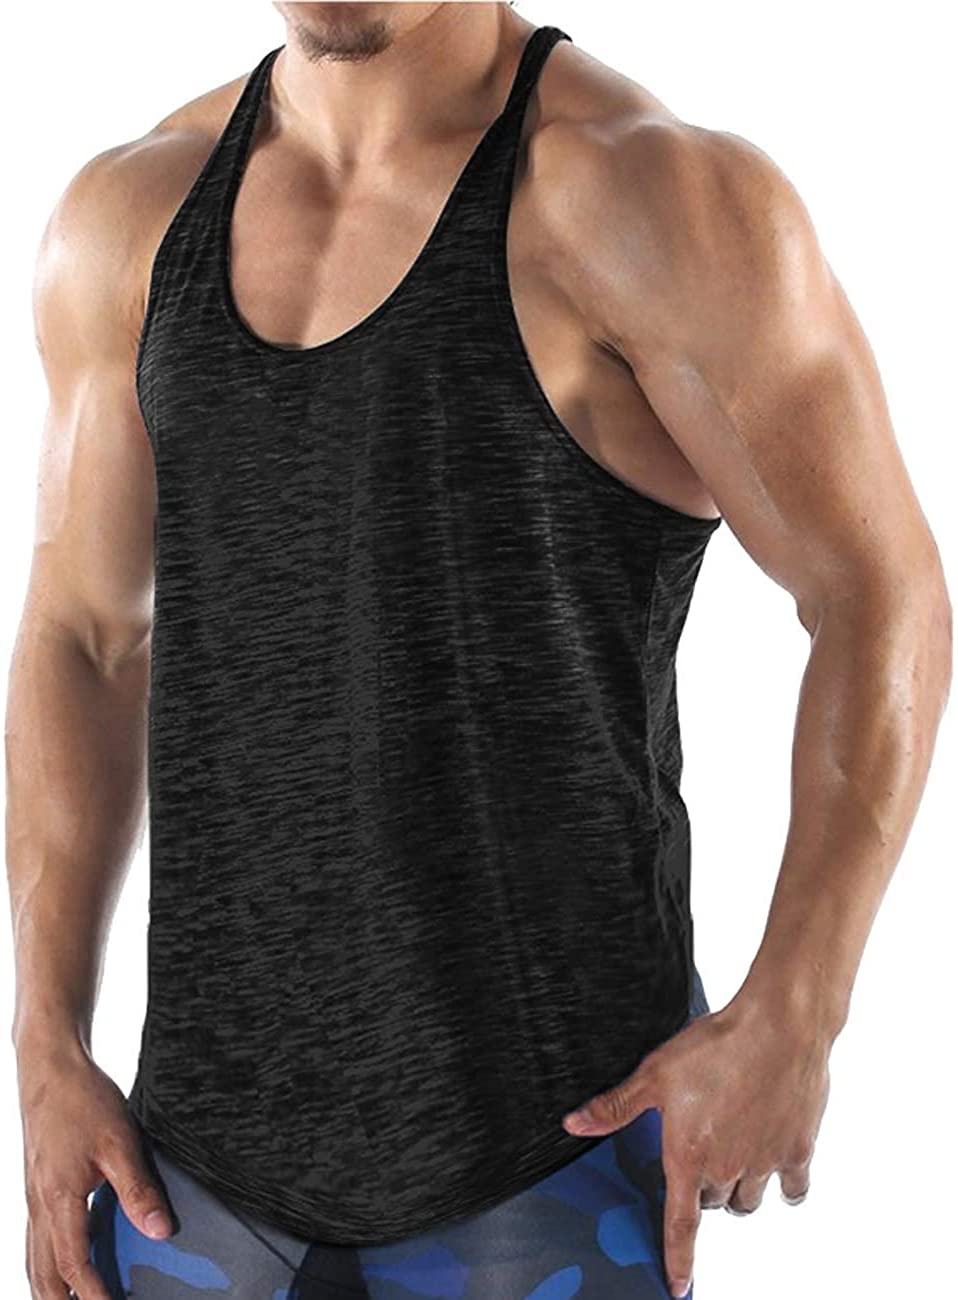 COOFANDY Men's 3 Pack Workout Tank Tops Quick Dry Sleeveless Gym Shirts Bodybuilding Fitness Muscle Tee Shirts